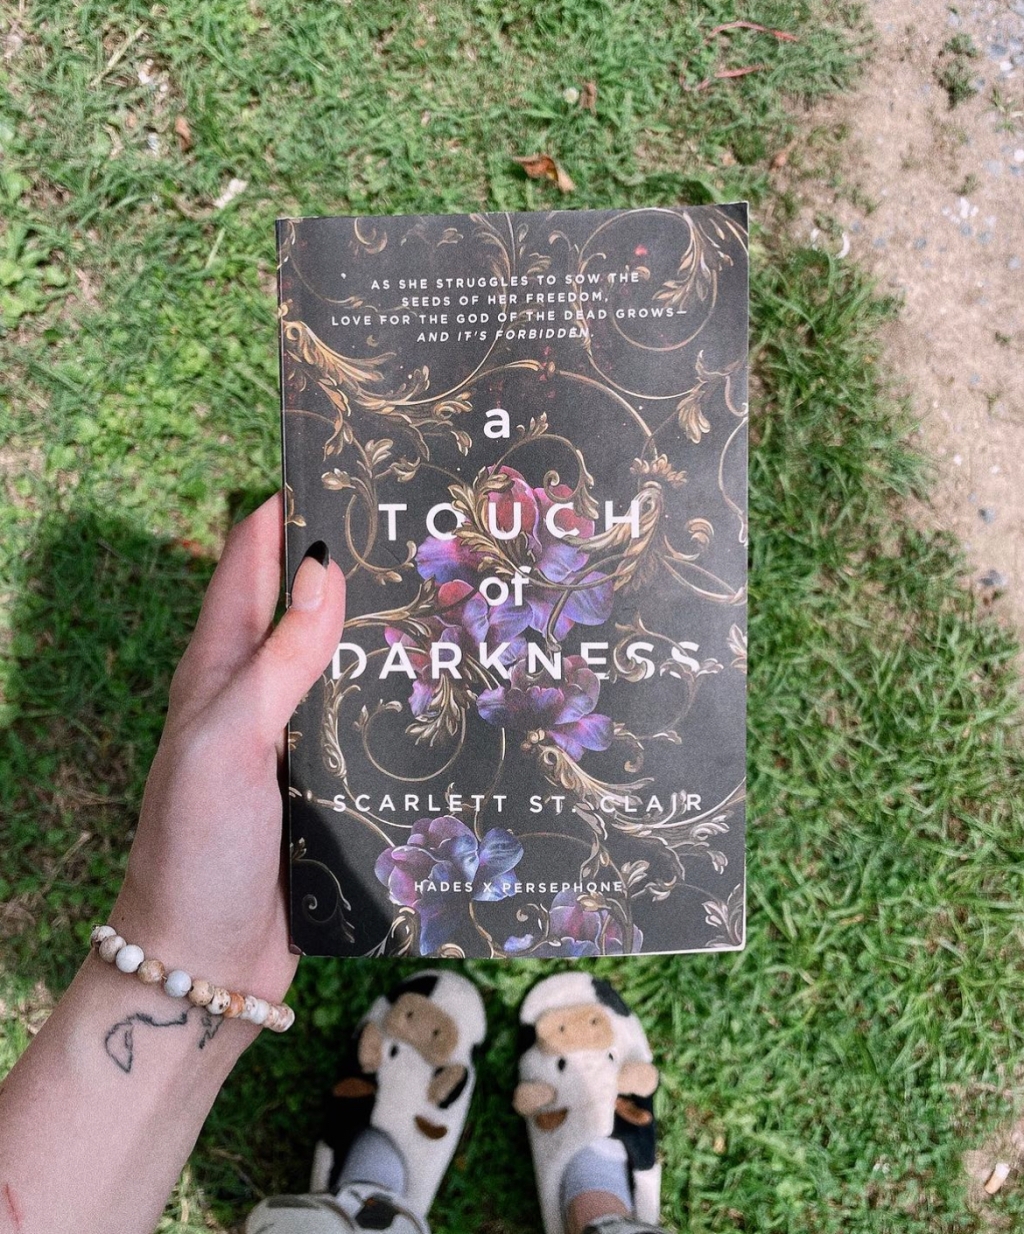 A Touch of Darkness